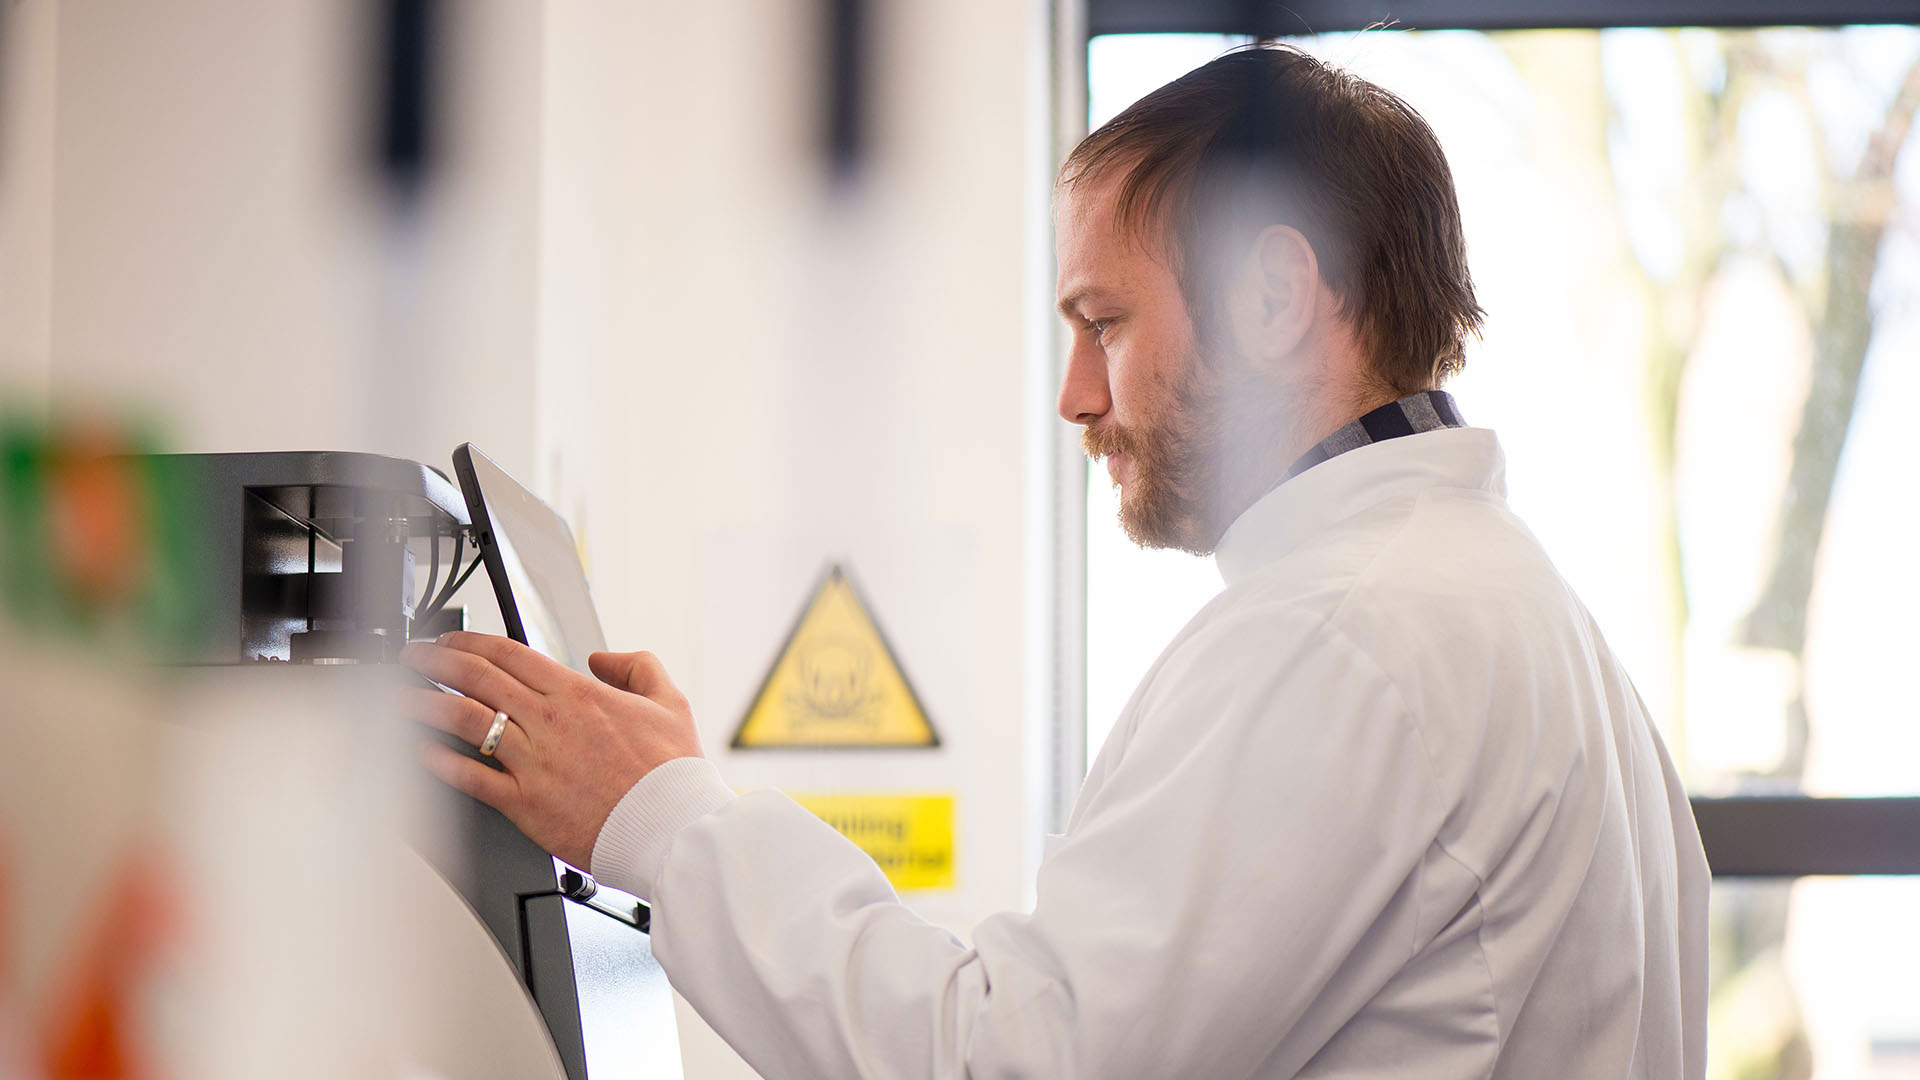 Man wearing a lab coat pressing a button on a machine